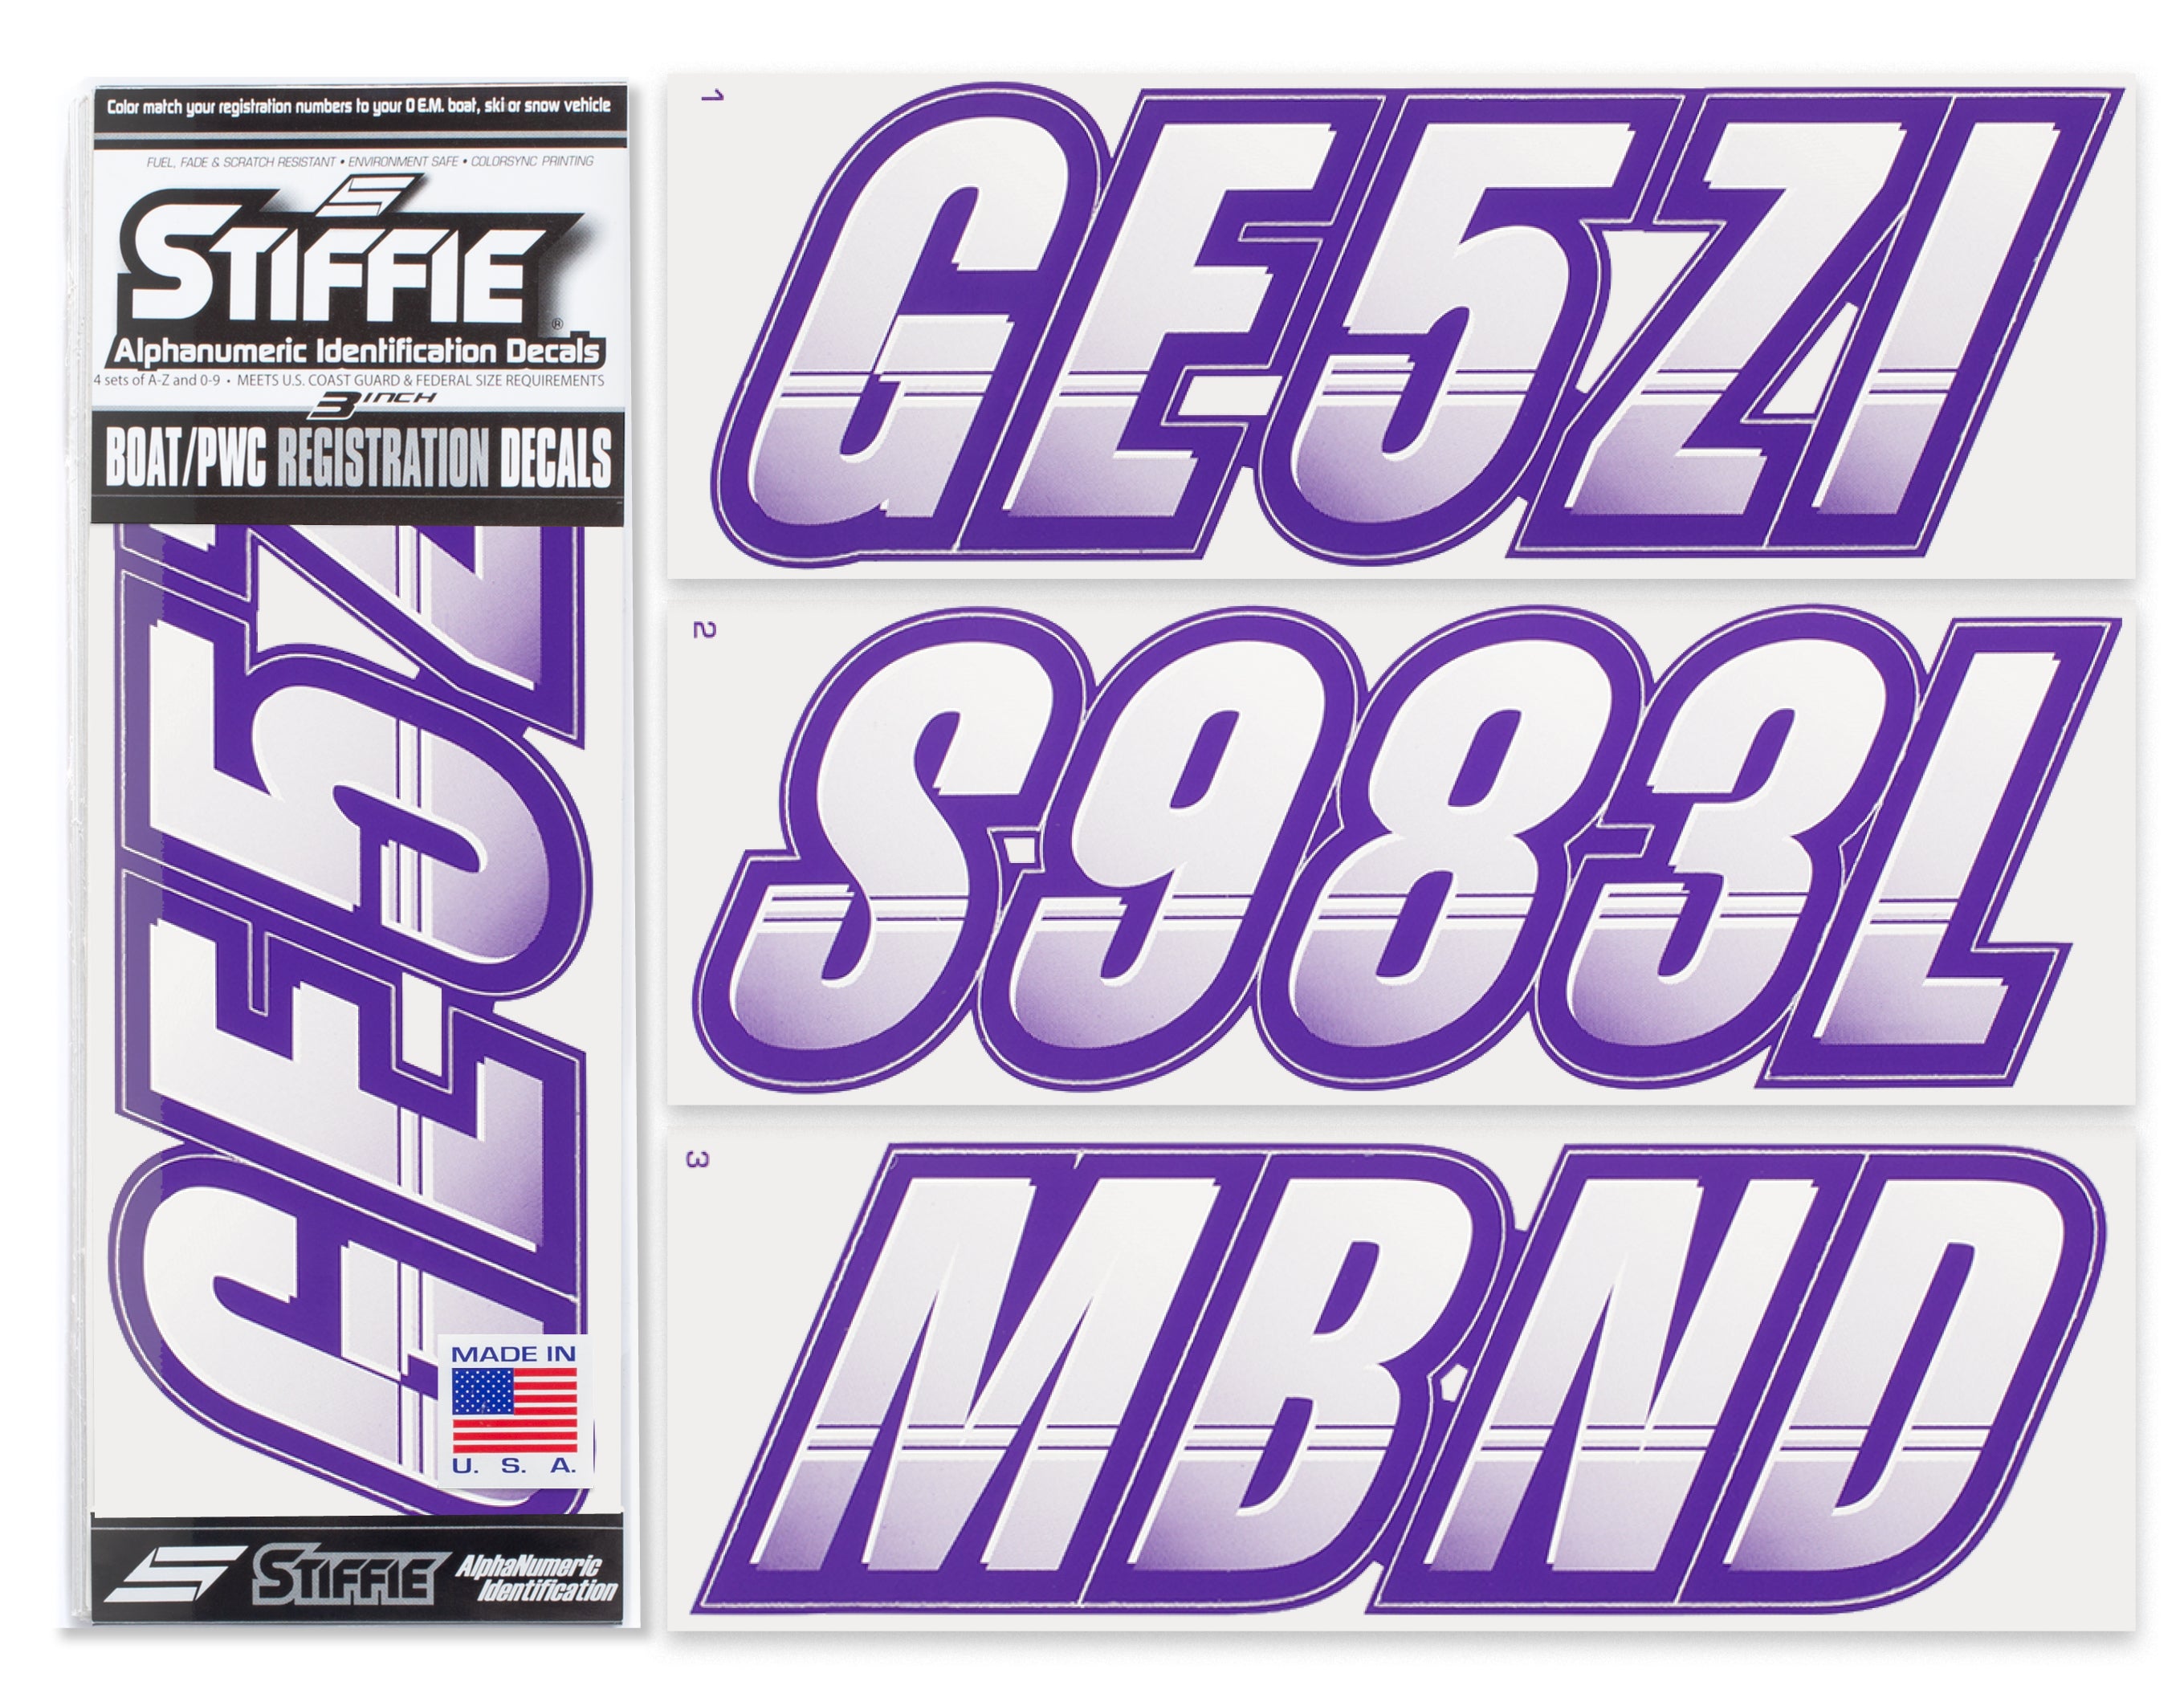 Stiffie Techtron White/Purple 3" Alpha-Numeric Registration Identification Numbers Stickers Decals for Boats & Personal Watercraft